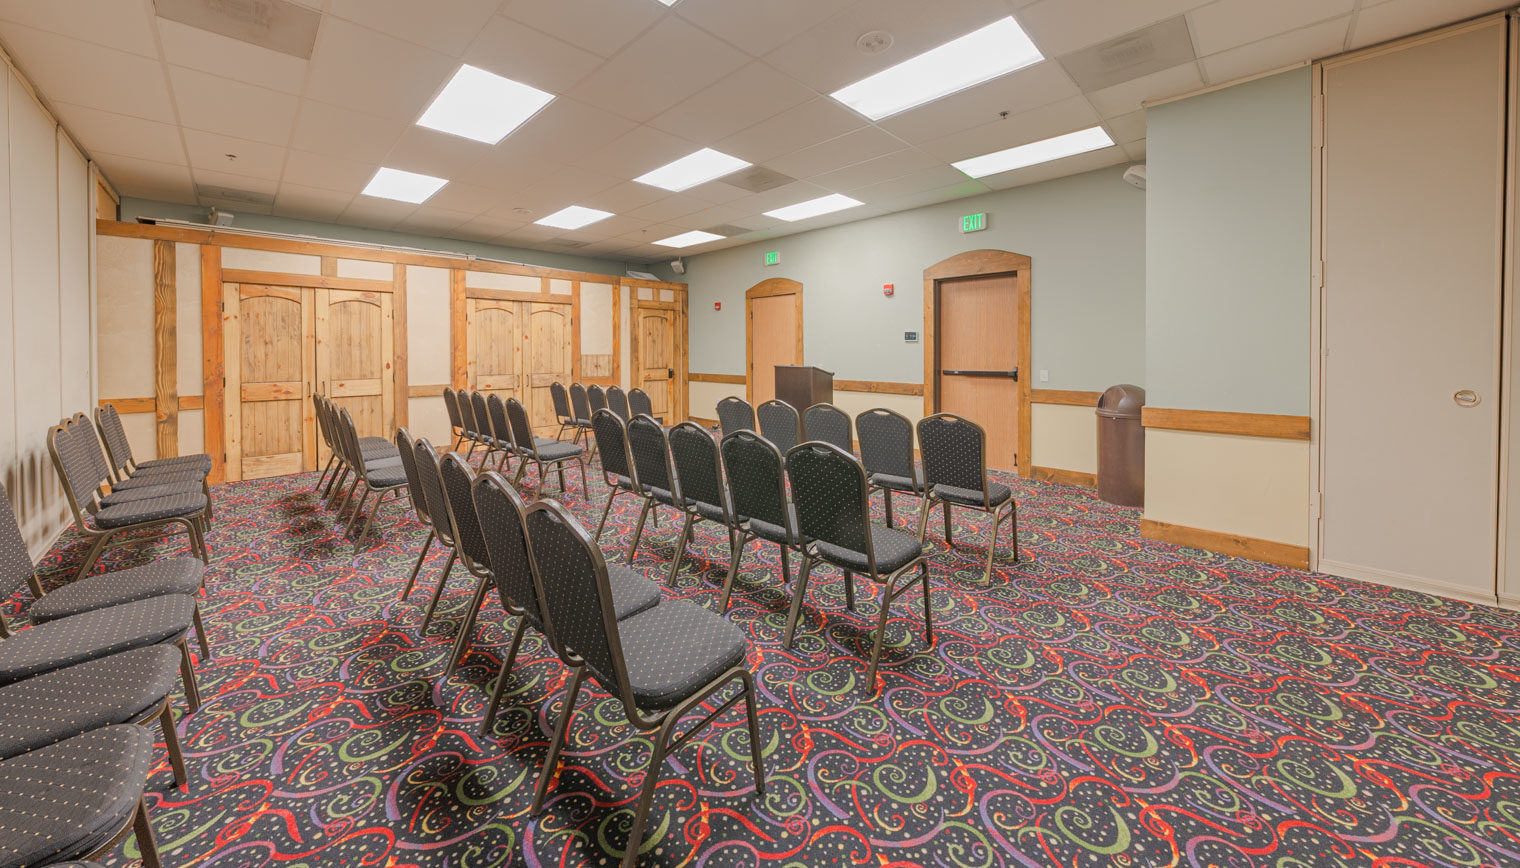 Shasta meeting space with rows of seats.